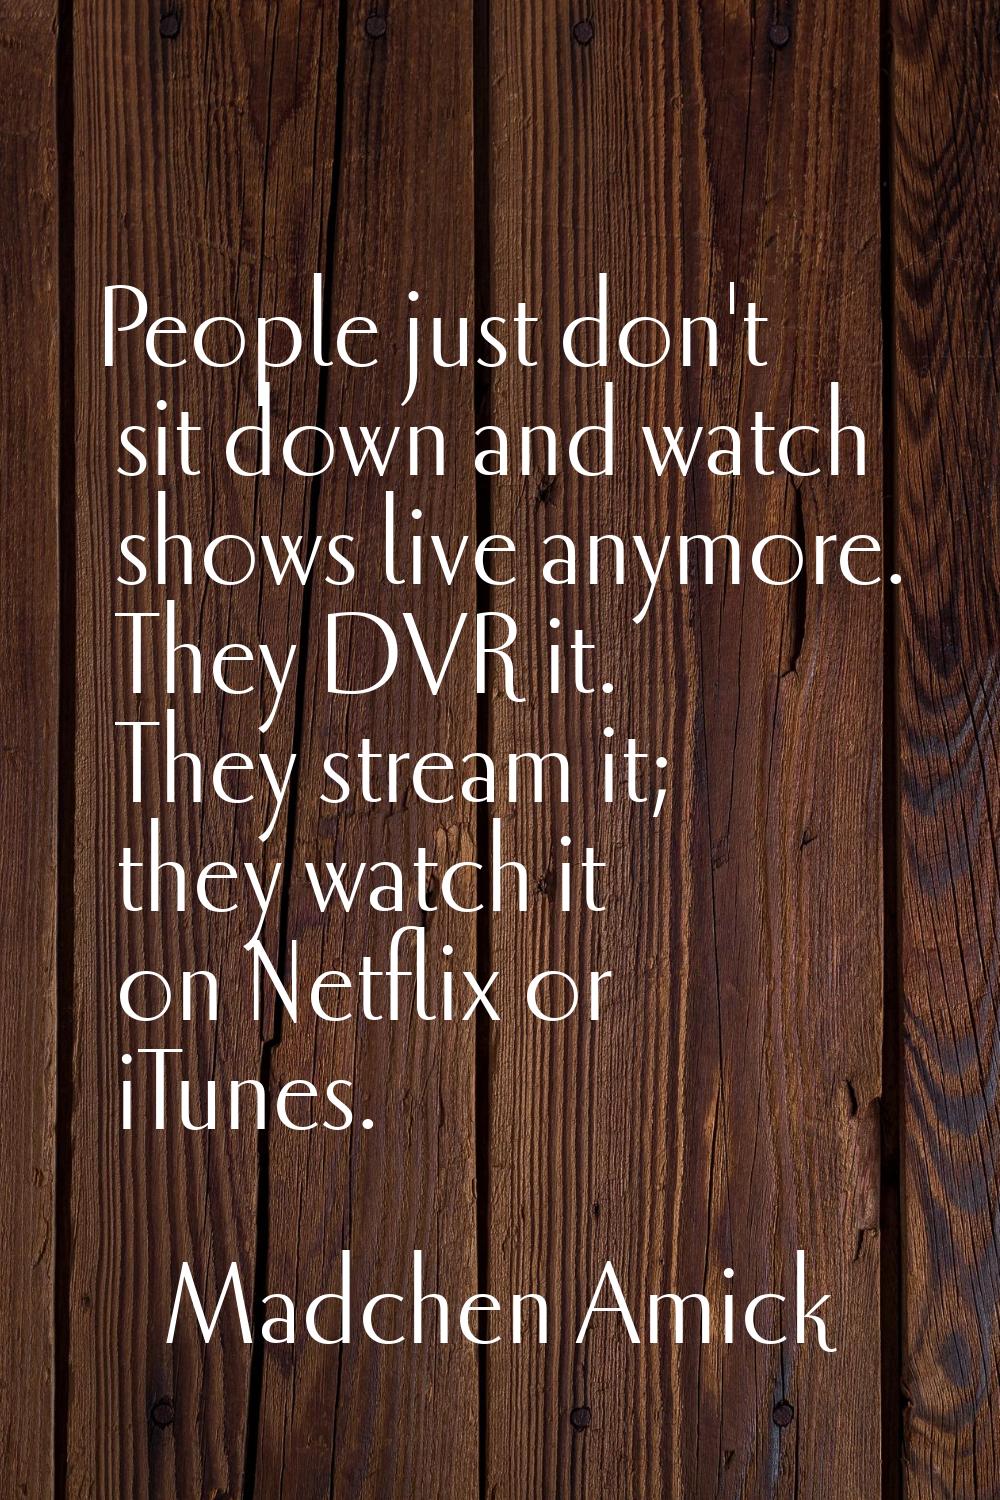 People just don't sit down and watch shows live anymore. They DVR it. They stream it; they watch it